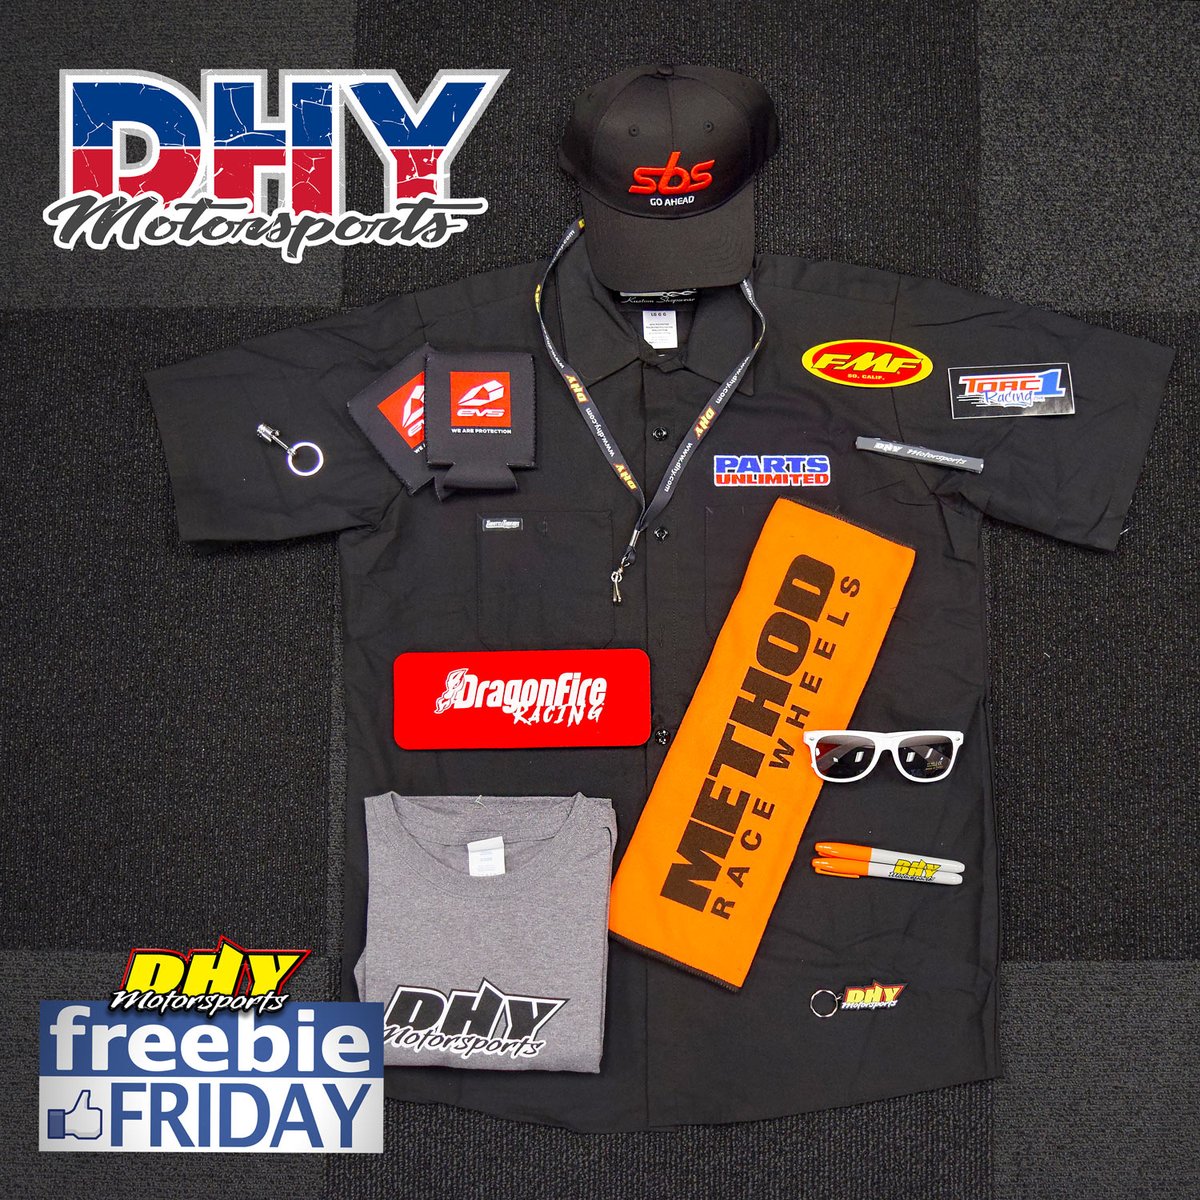 It's Friday so it's #FreebieFriday! We're featuring a #PartsUnlimited pit shirt, #EVS and DragonFire koozies, #SBS hat, #Method microfiber, #XKGo shades, #FMF and #Torc1Racing stickers and the #DHYMotorsports #SwagBag all with a hint of #Lysol disinfectant spray. Get clicking!